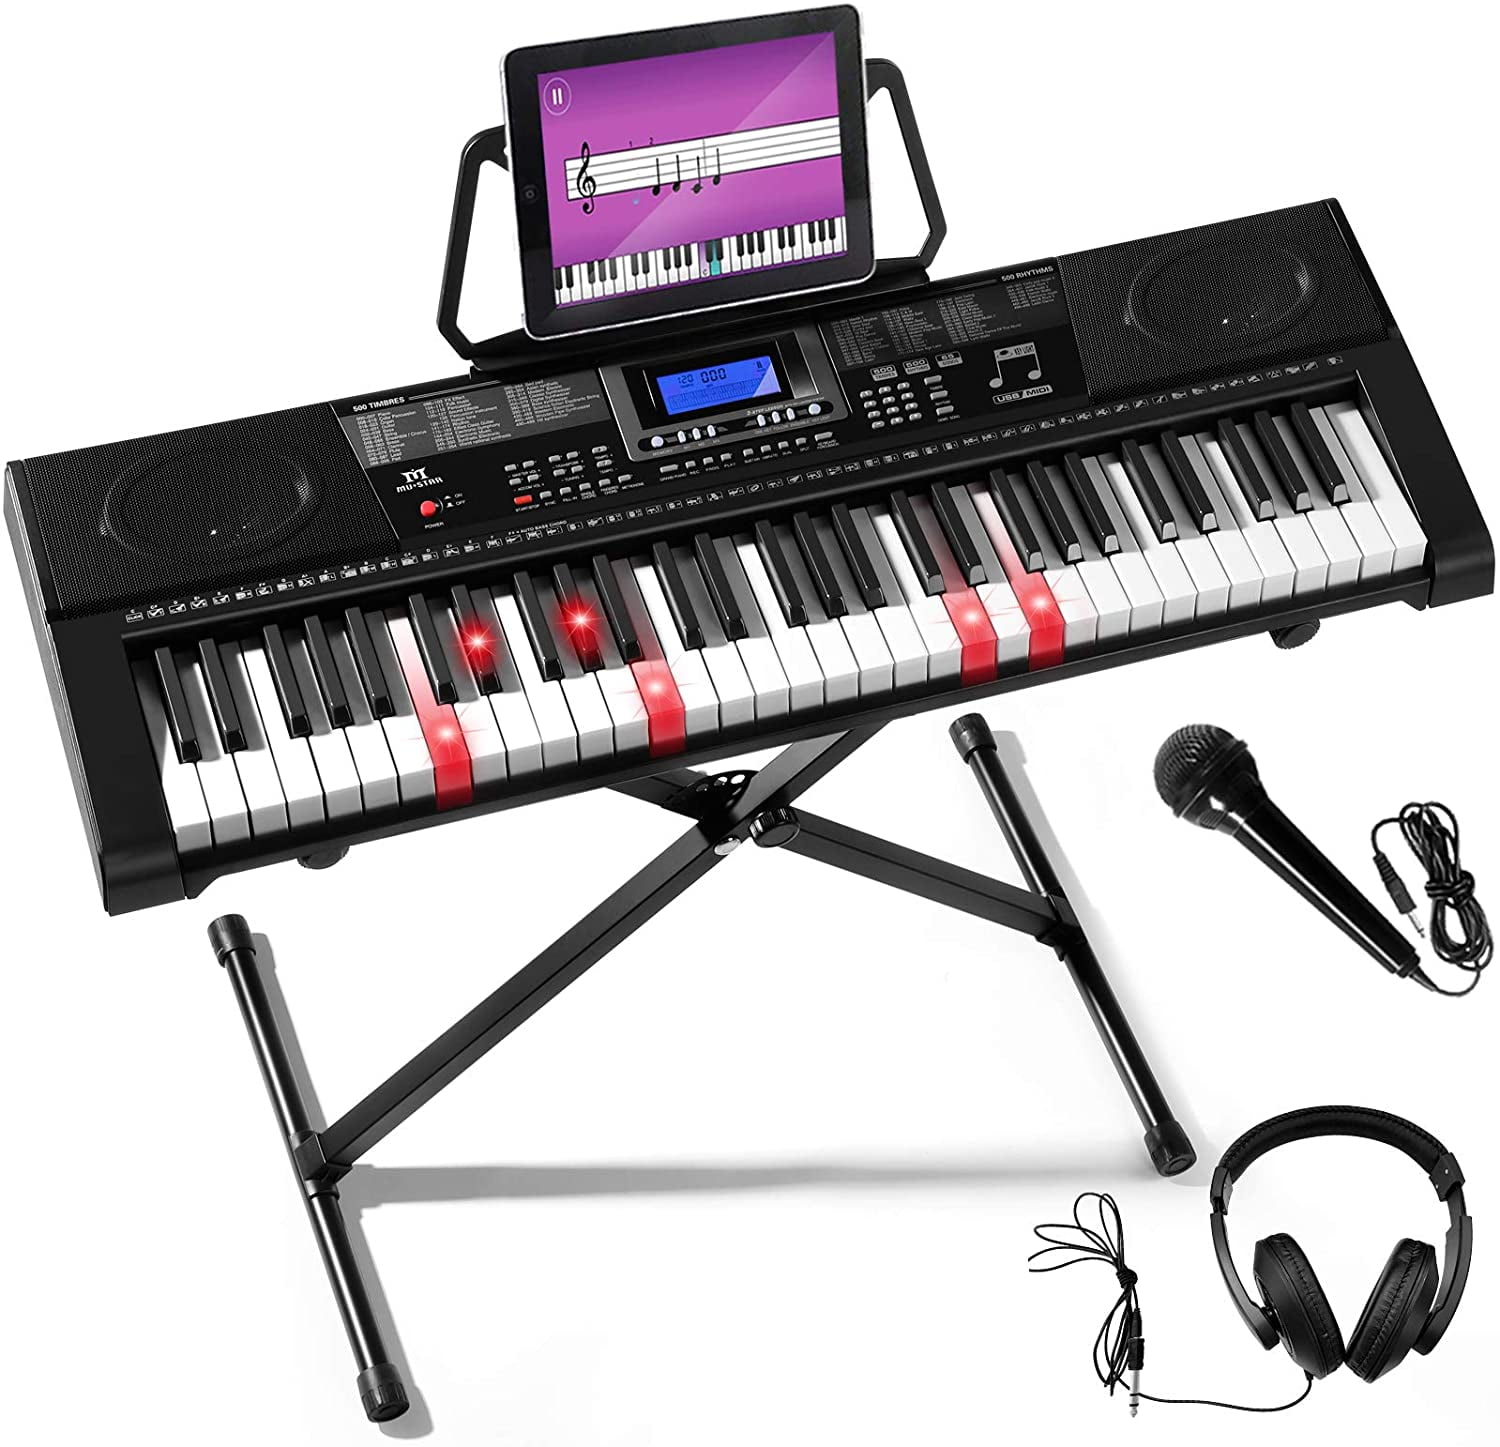 Acquaintant Creative Childrens Piano Keyboard Toy Multi-Function Music Electronic Toys Pianos & Keyboards 